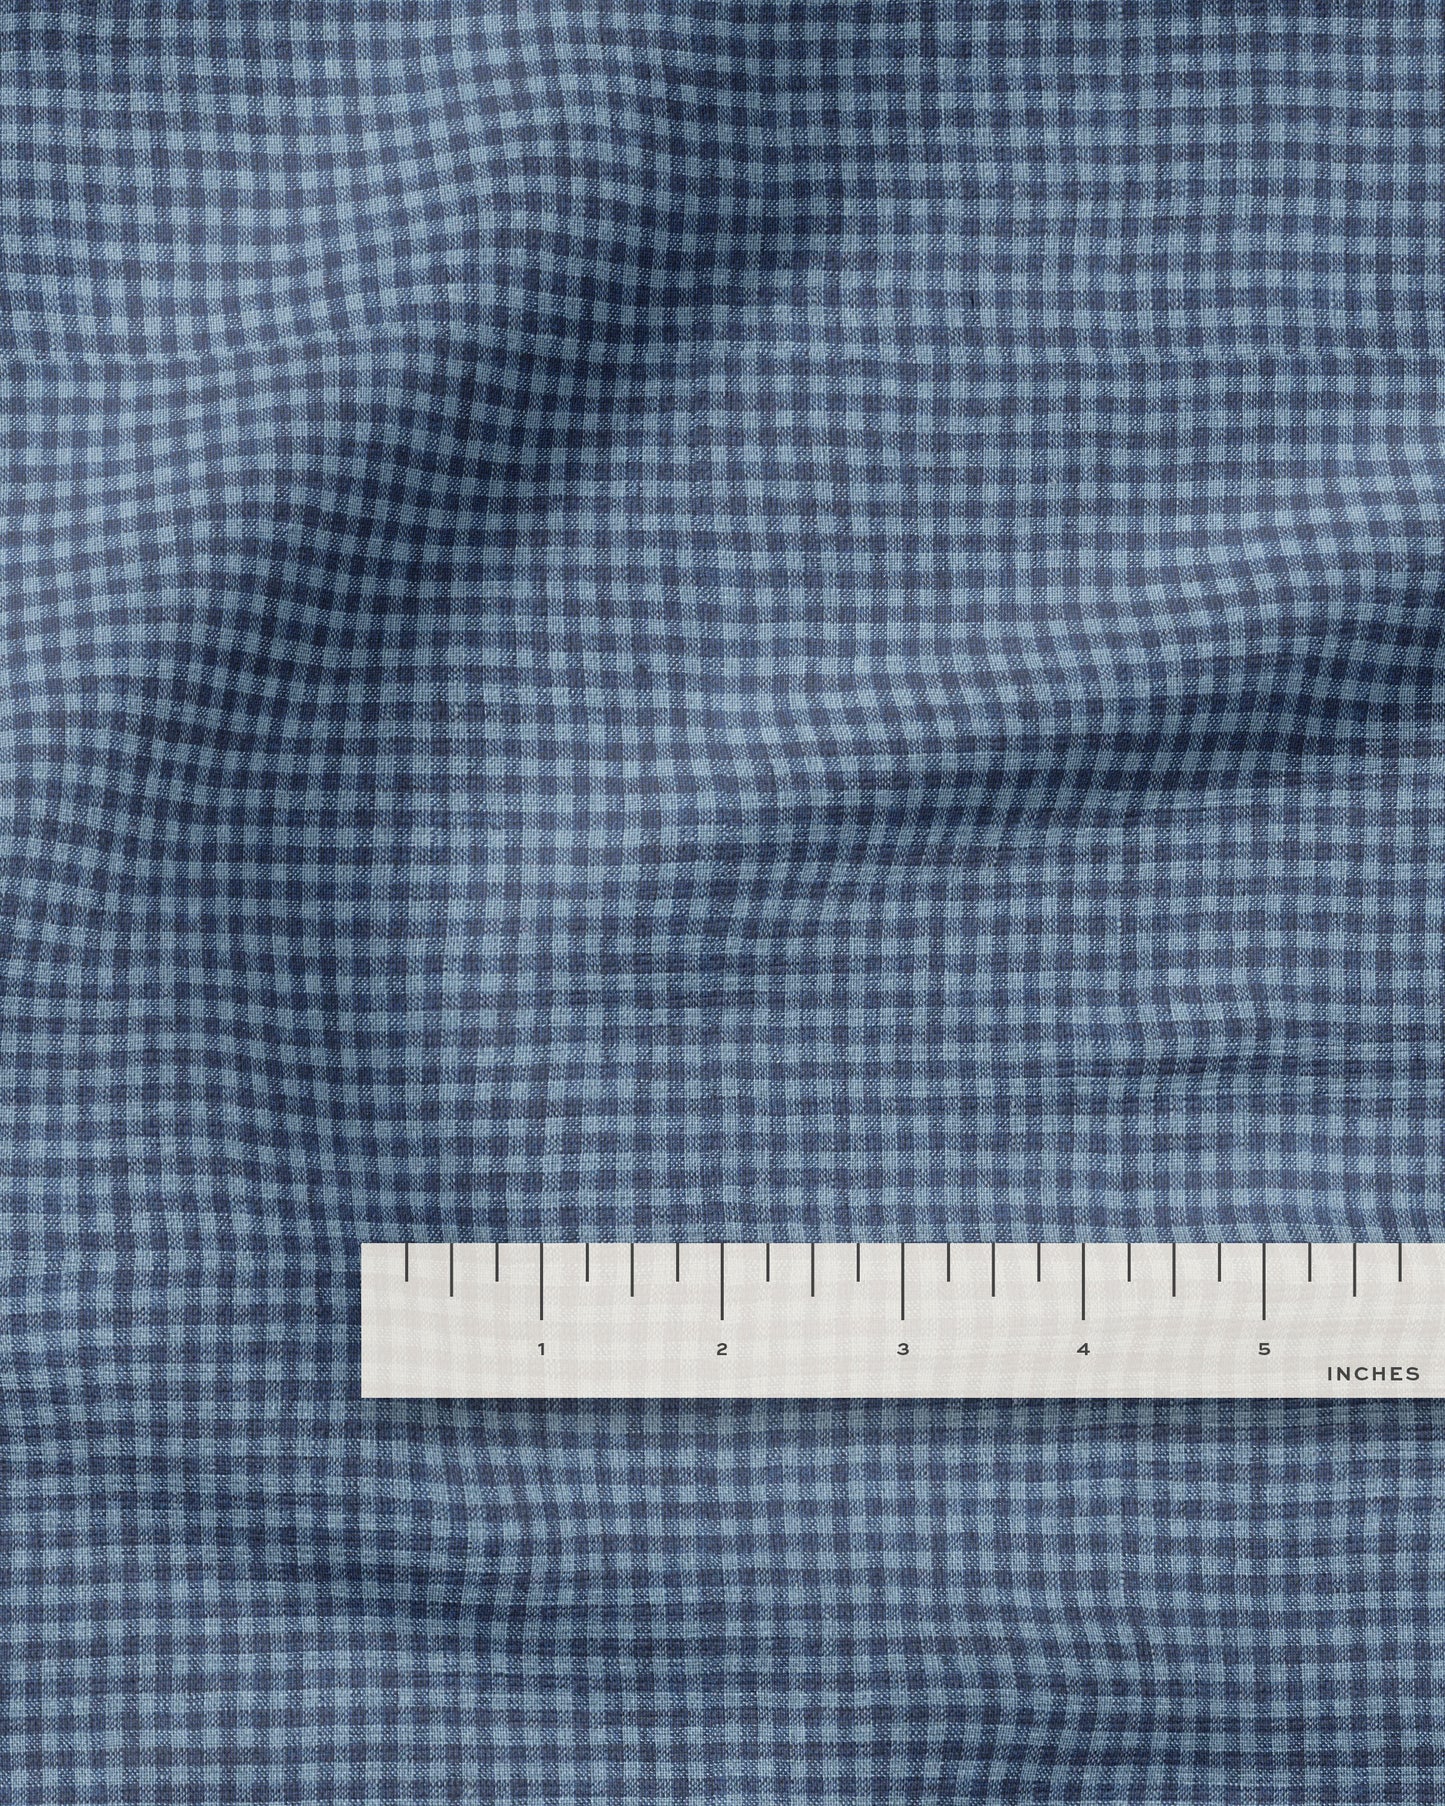 Micro Coverall Gingham Linen